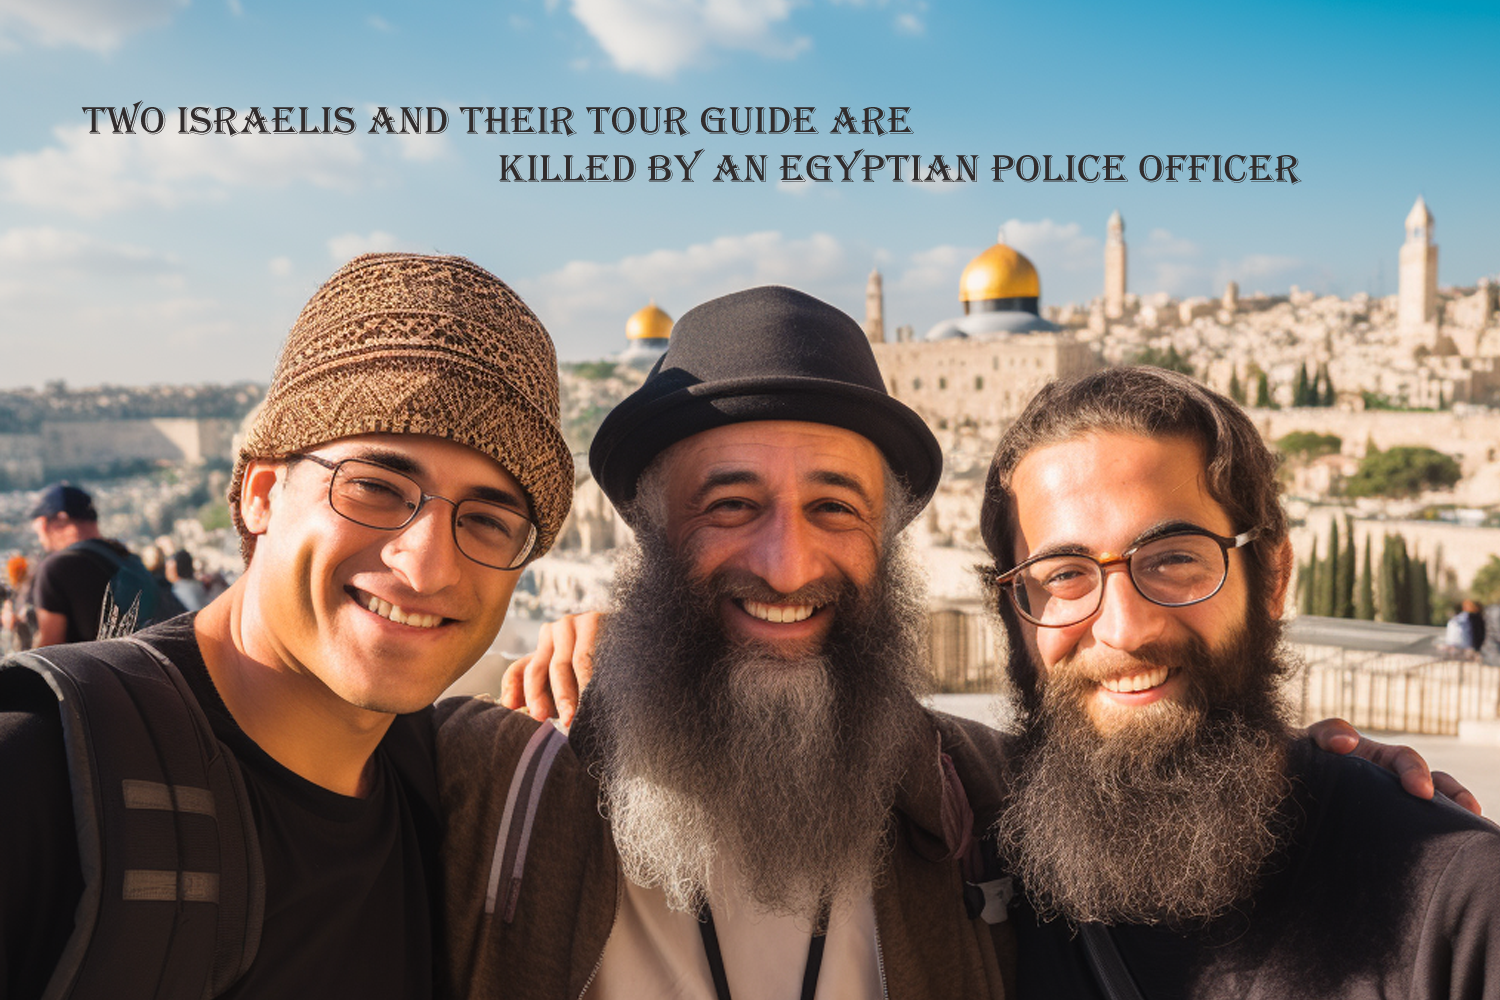 Two Israelis and their tour guide are killed by an Egyptian police officer